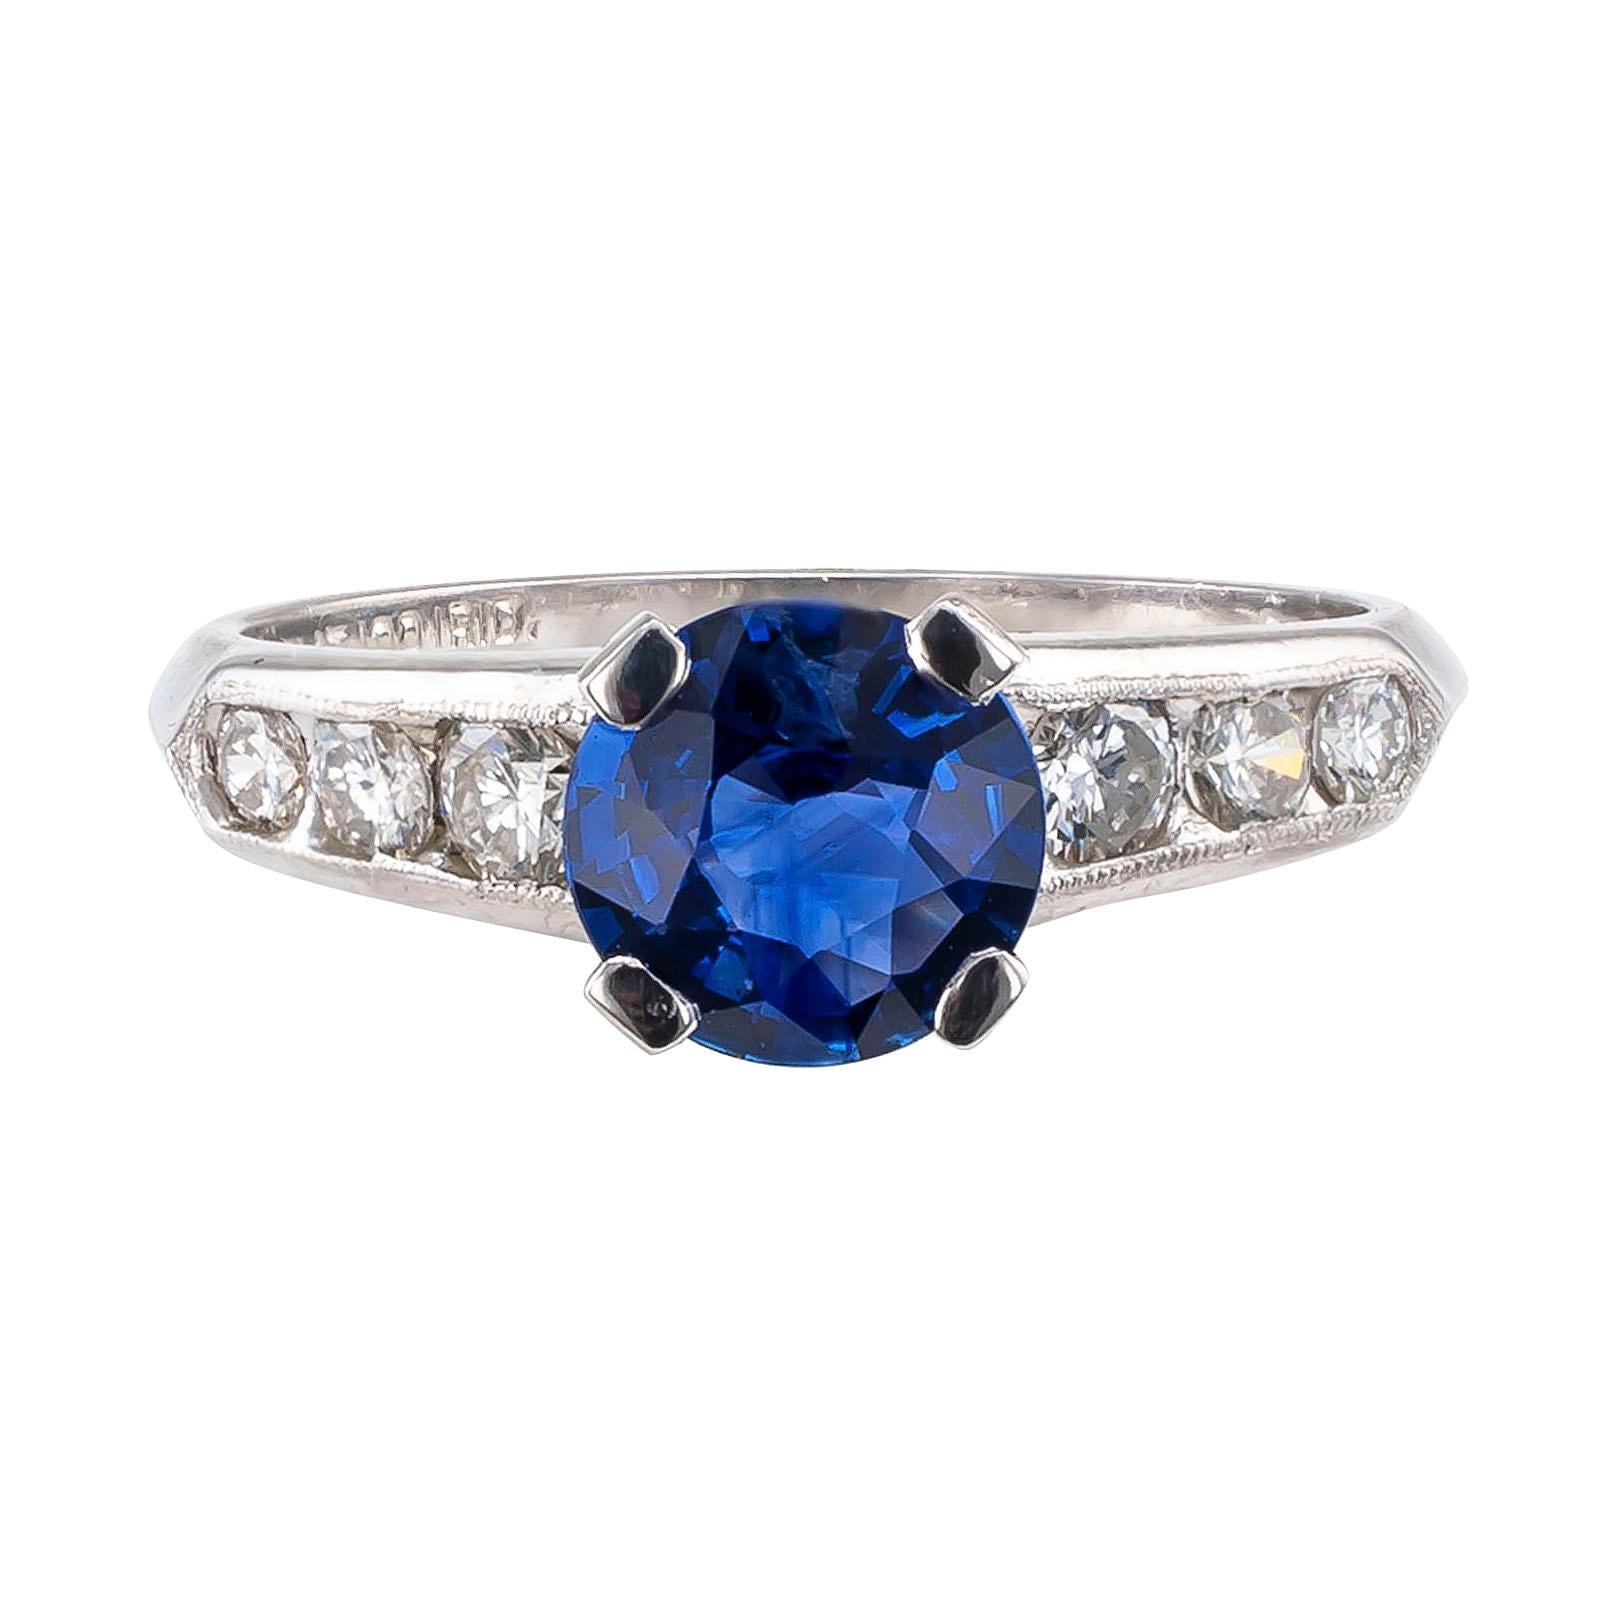  Sapphire and diamond platinum engagement ring circa 1950.

DETAILS:
GEMSTONES:  one round, faceted blue sapphire weighing approximately 1.0 carat.

DIAMONDS:  six graduating, round brilliant-cut diamonds totaling approximately 0.32 carat, H – I